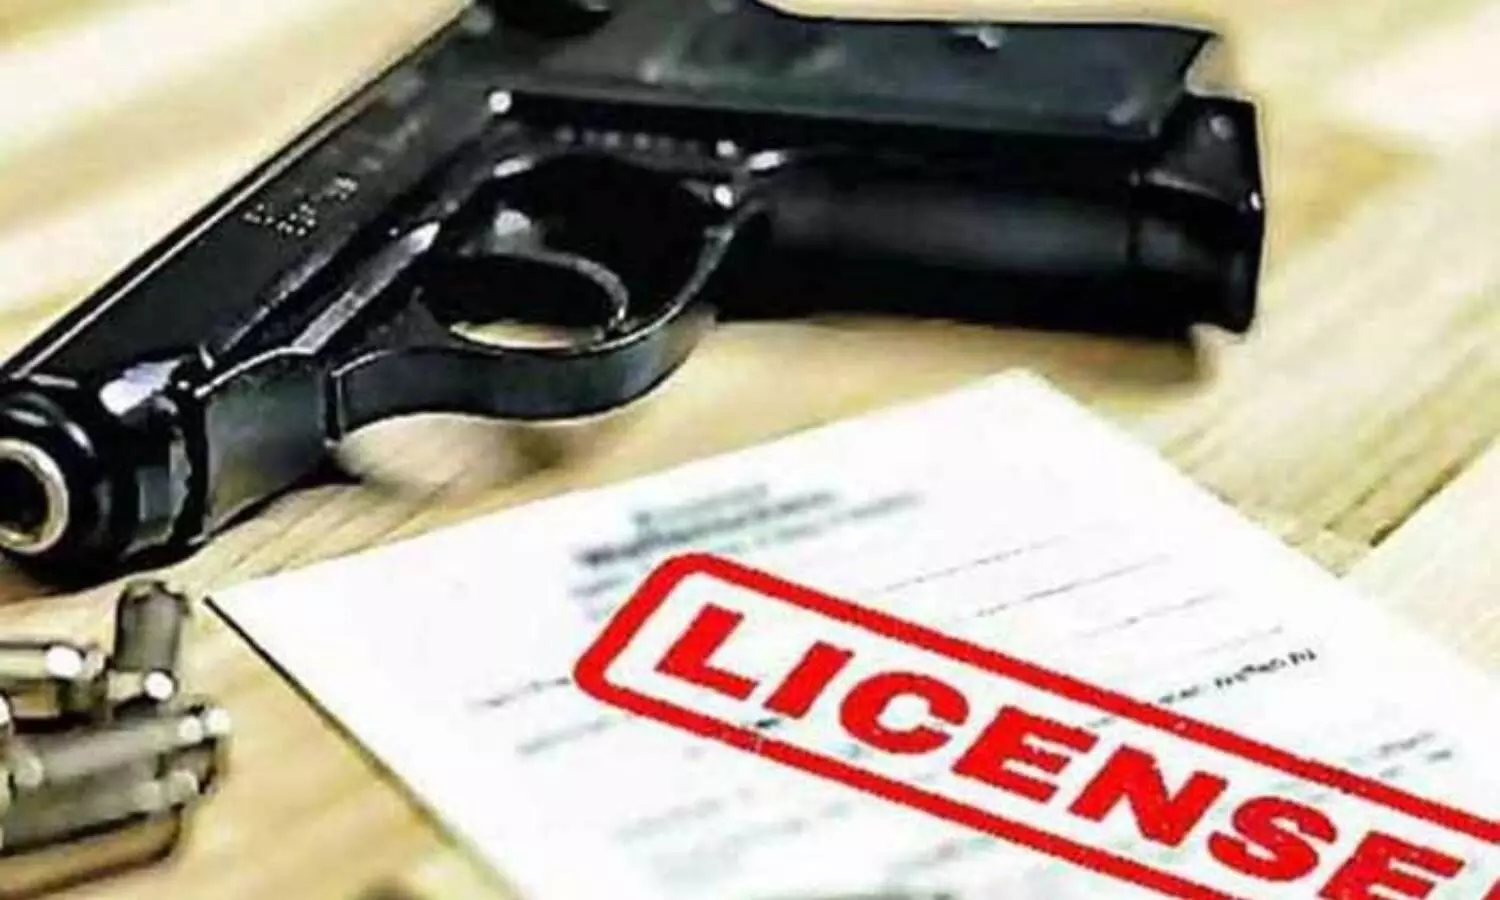 Kanpur arms license and passport finalized verification Deadline